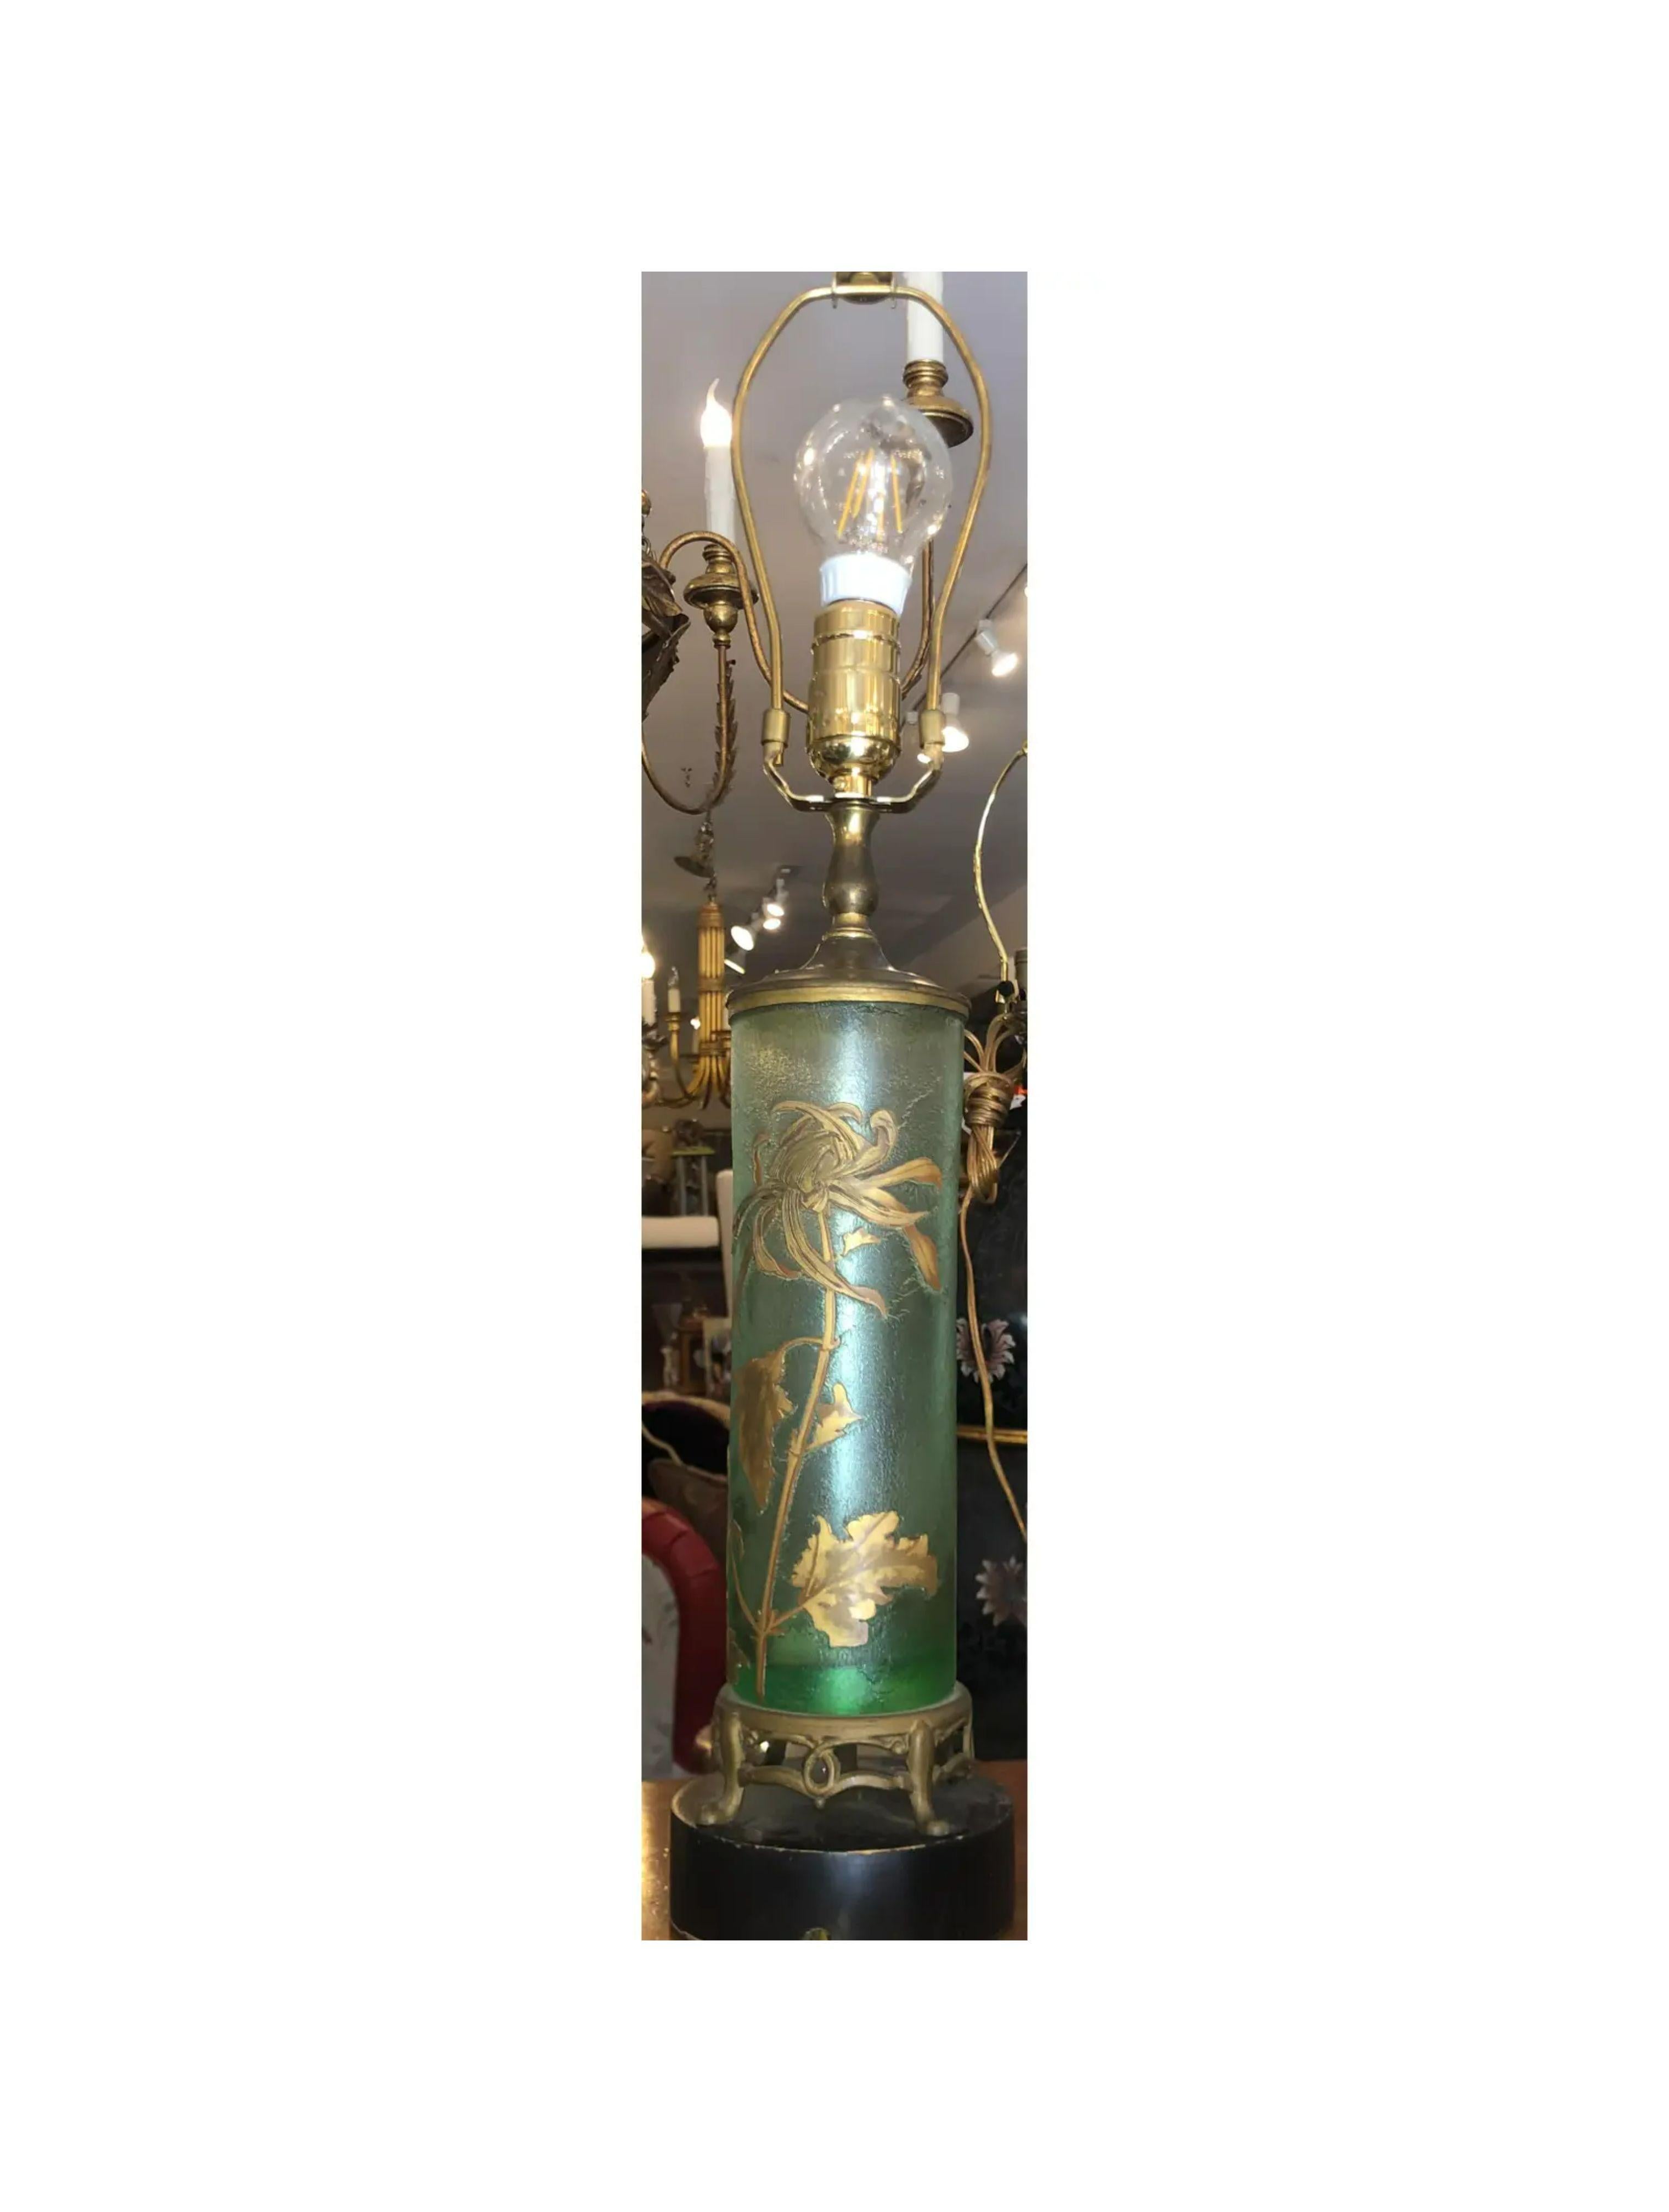 Antique Mont Joye Cameo glass table lamp.

Additional information: 
Materials: Glass, Lights, Wood
Color: Green
Period: 1920s
Styles: French
Lamp Shade: Not Included
Item Type: Vintage, Antique or Pre-owned
Dimensions: 5